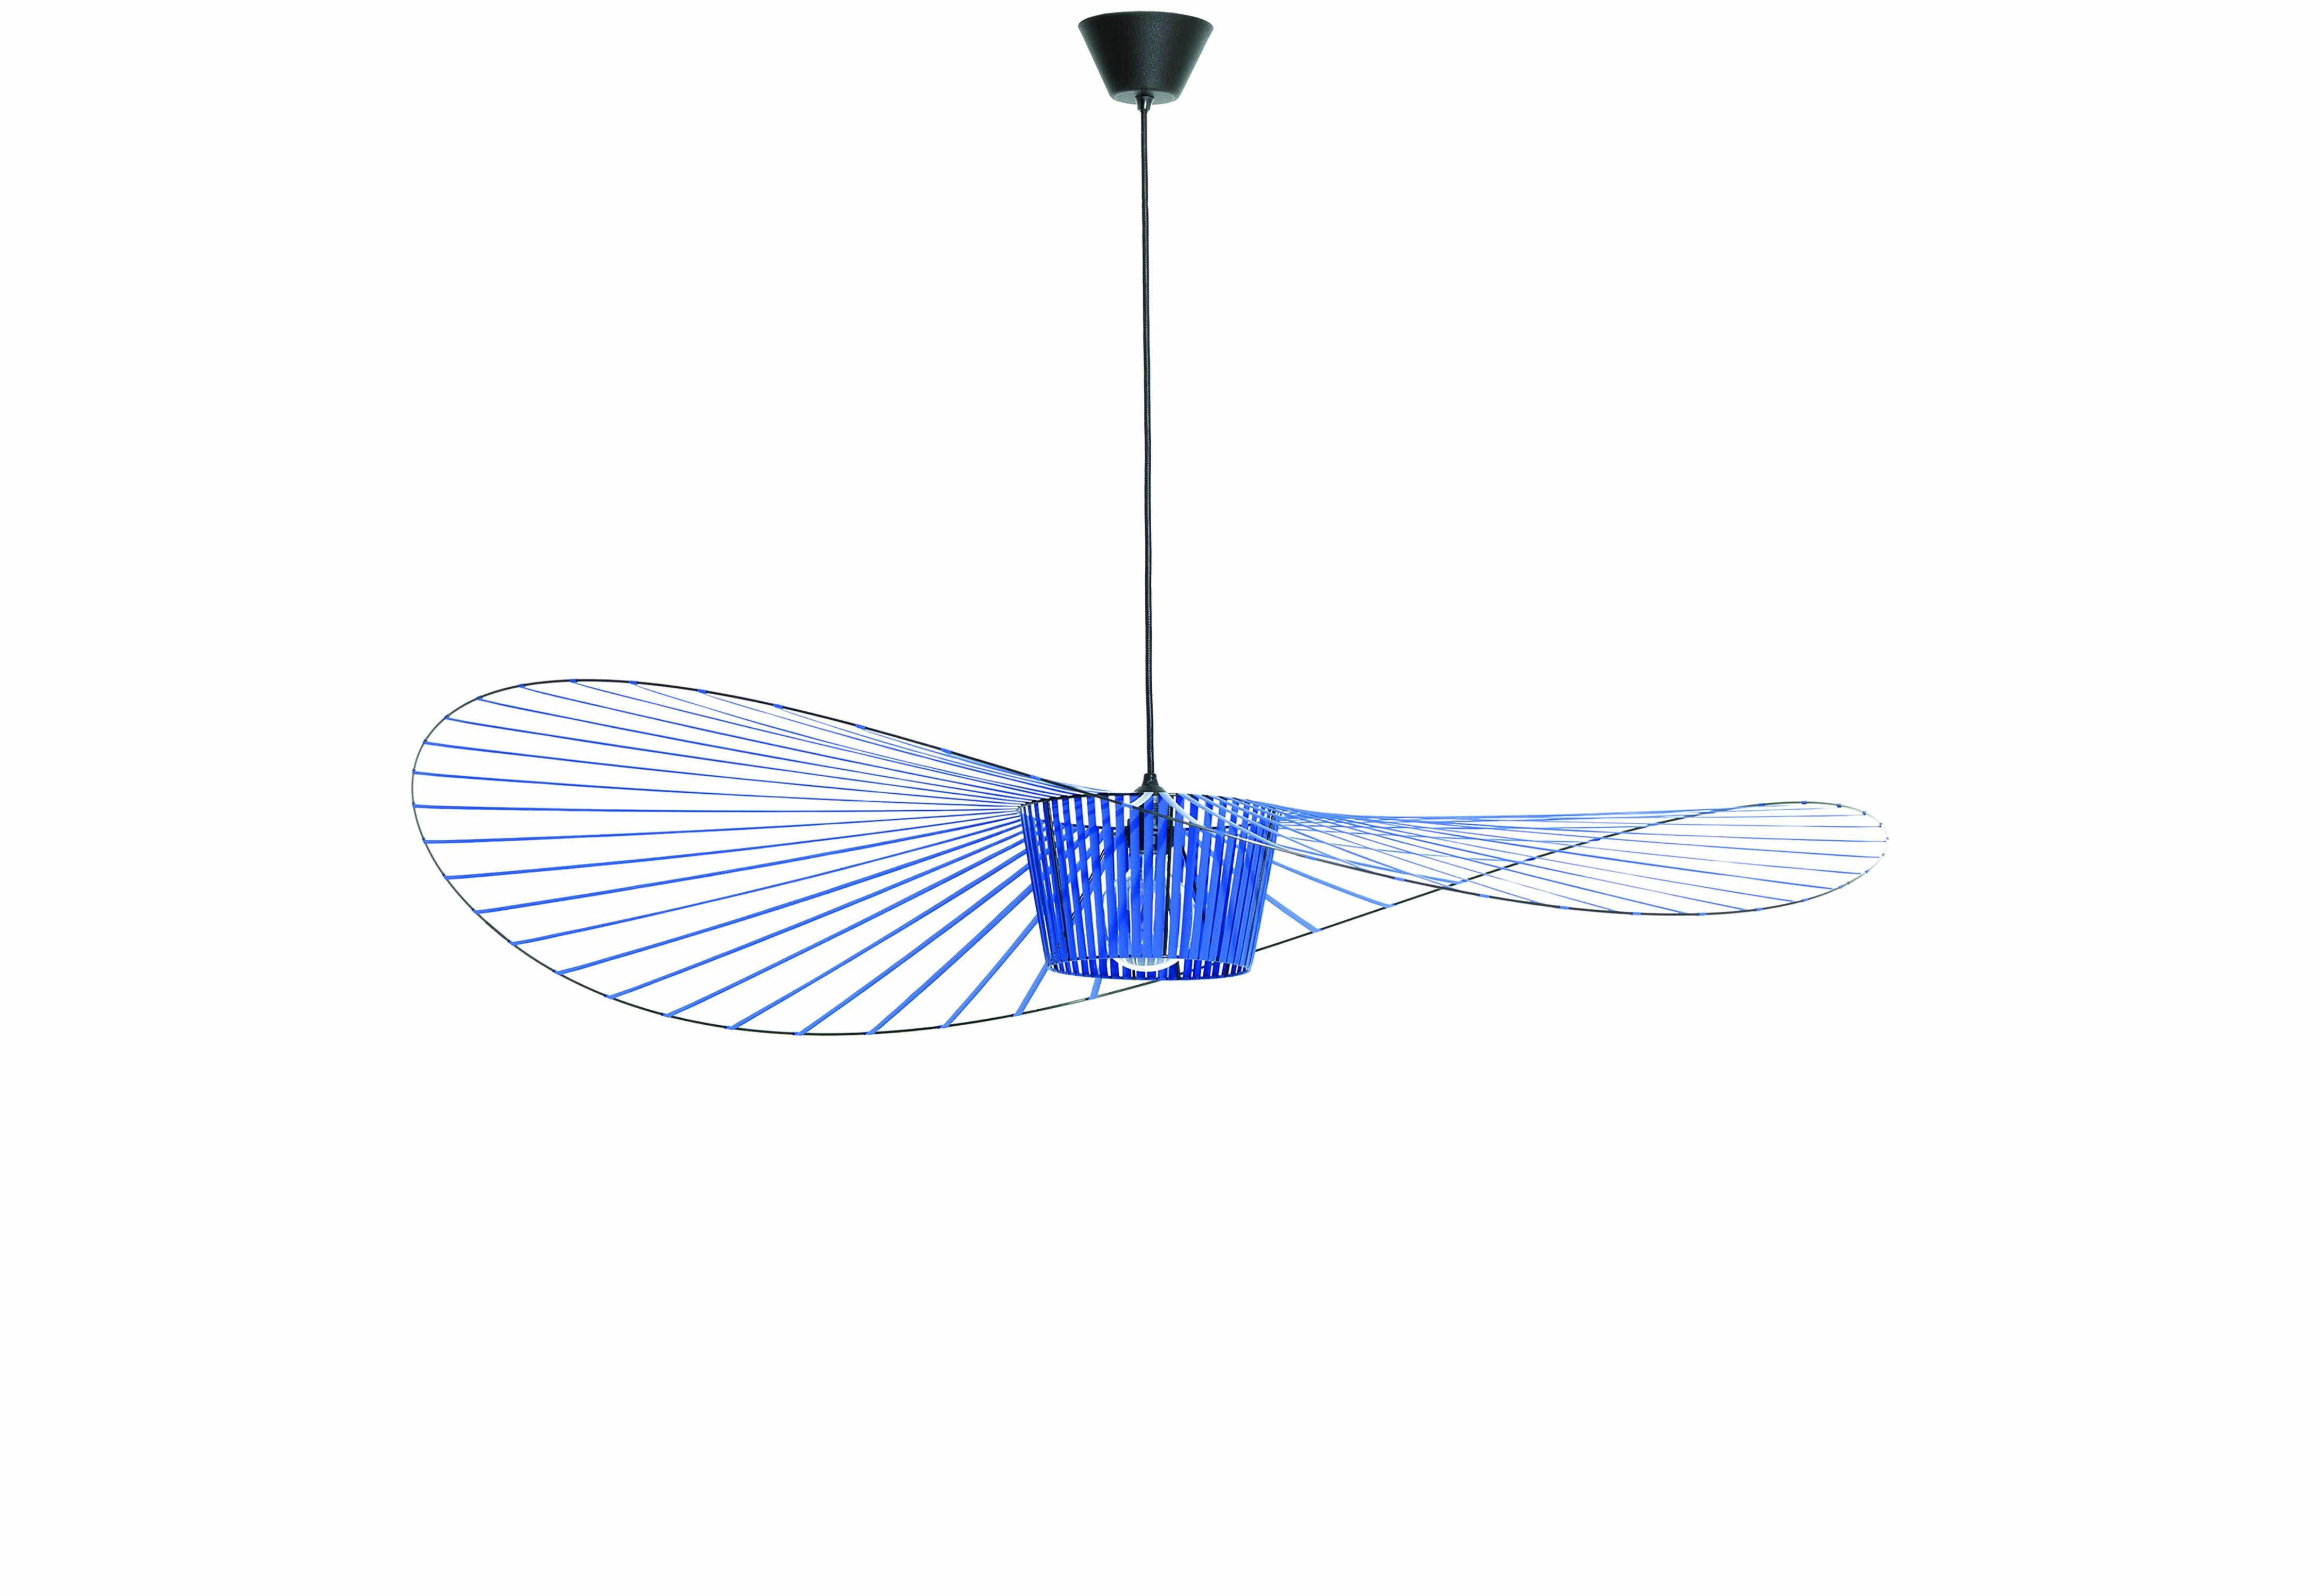 Petite Friture Medium Vertigo Pendant Light in Cobalt by Constance Guisset, 2010

Edited by Petite Friture in 2010, the Vertigo pendant light is now an icon of contemporary design. With its ultra-light fiberglass structure, stretched with velvety